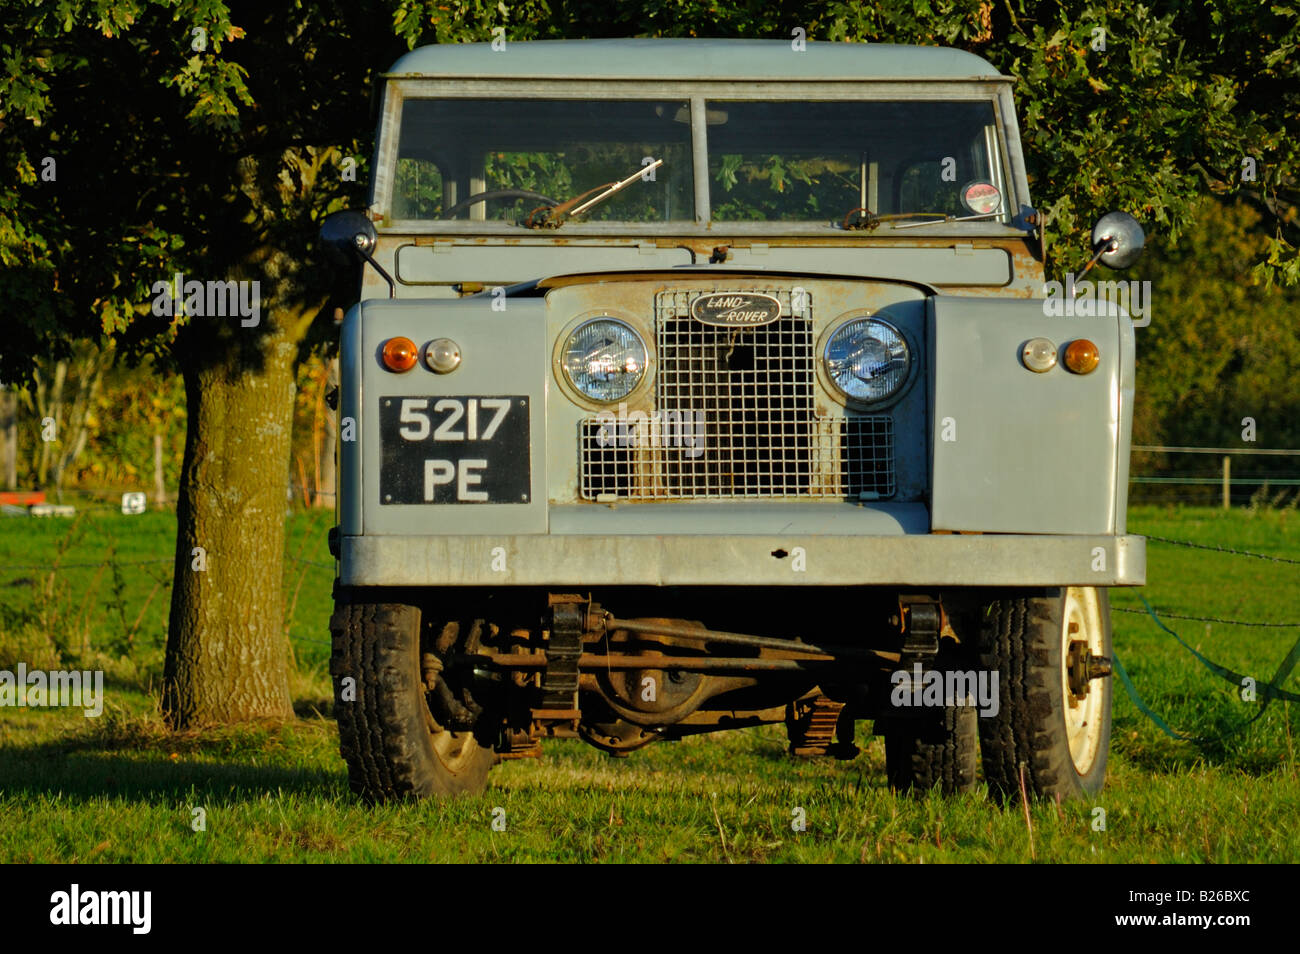 Historic 1963 Landrover Series 2a truckcab in very original and full working condition on a farm in Dunsfold, UK 2004. Stock Photo